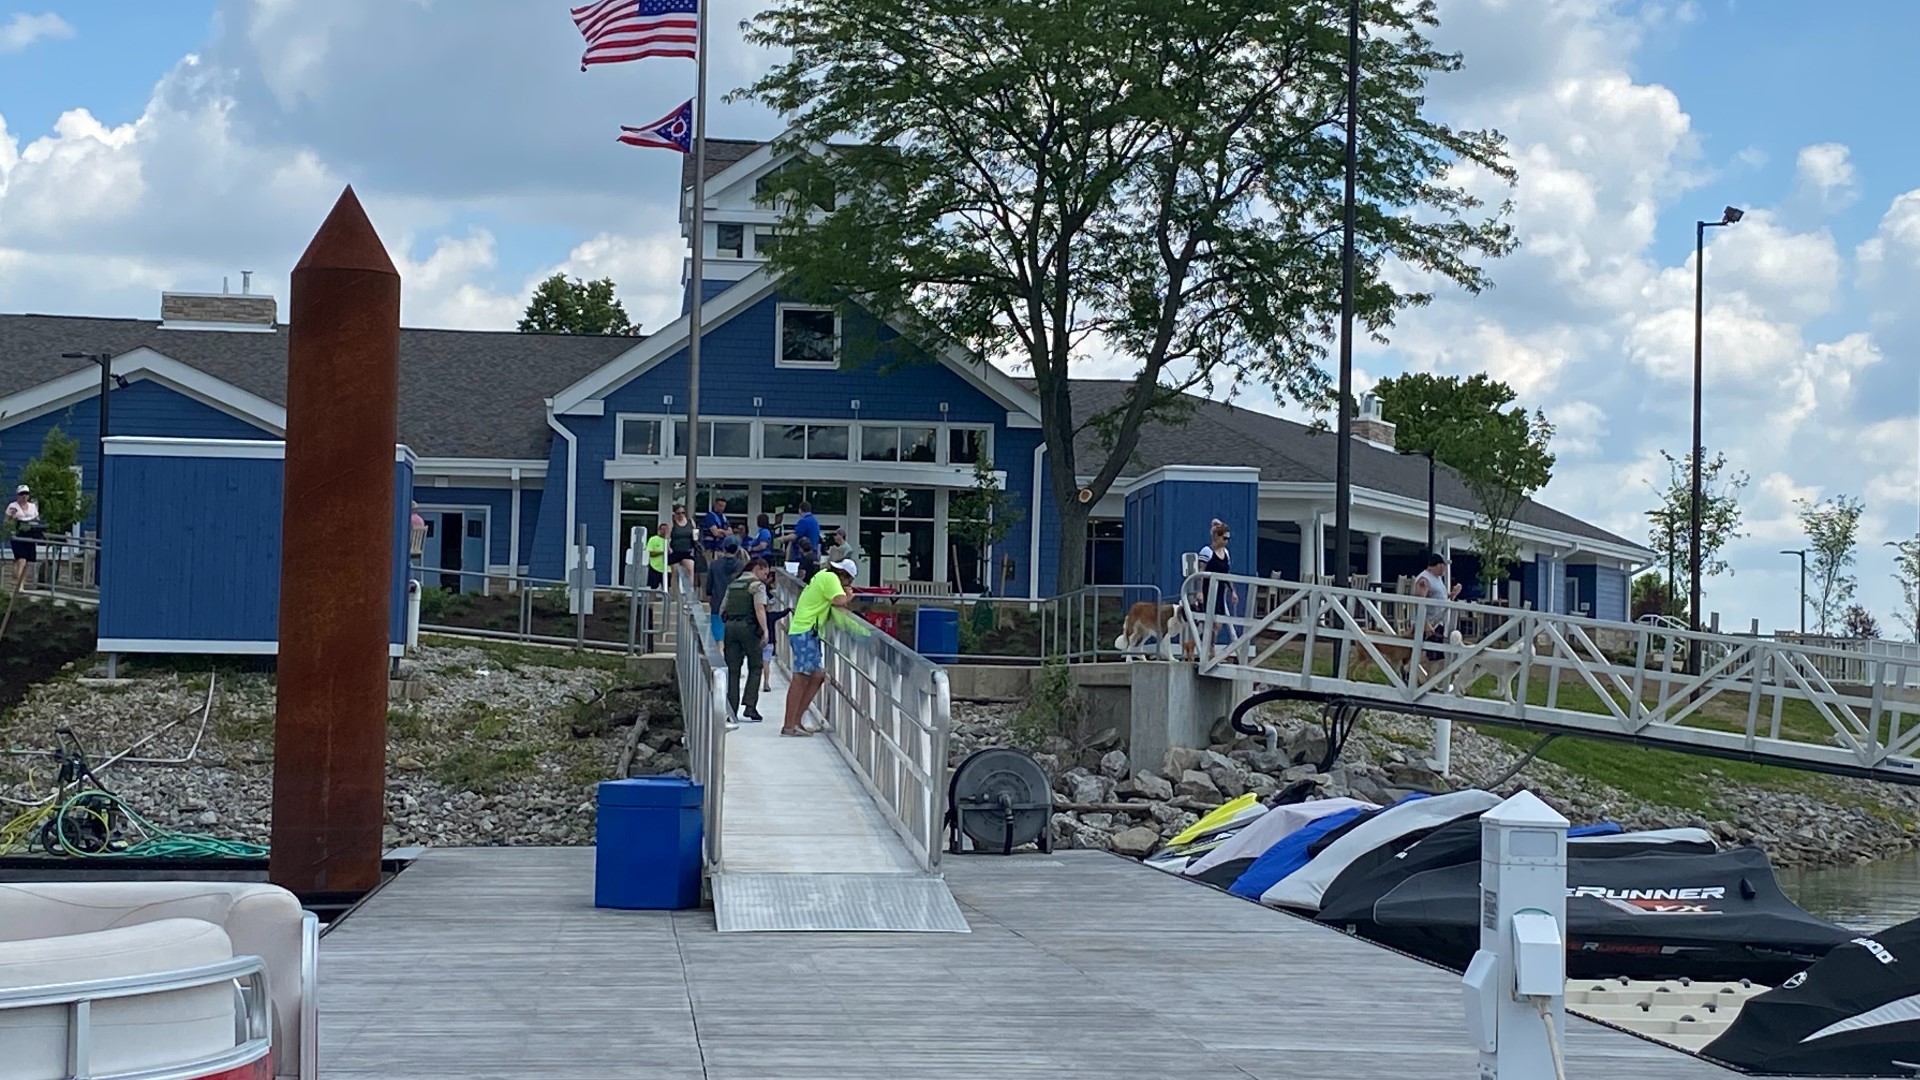 The Ohio Department of Natural Resources wants everyone to keep safety front in mind when hitting the water, with the opening of the new Alum Creek Marina.